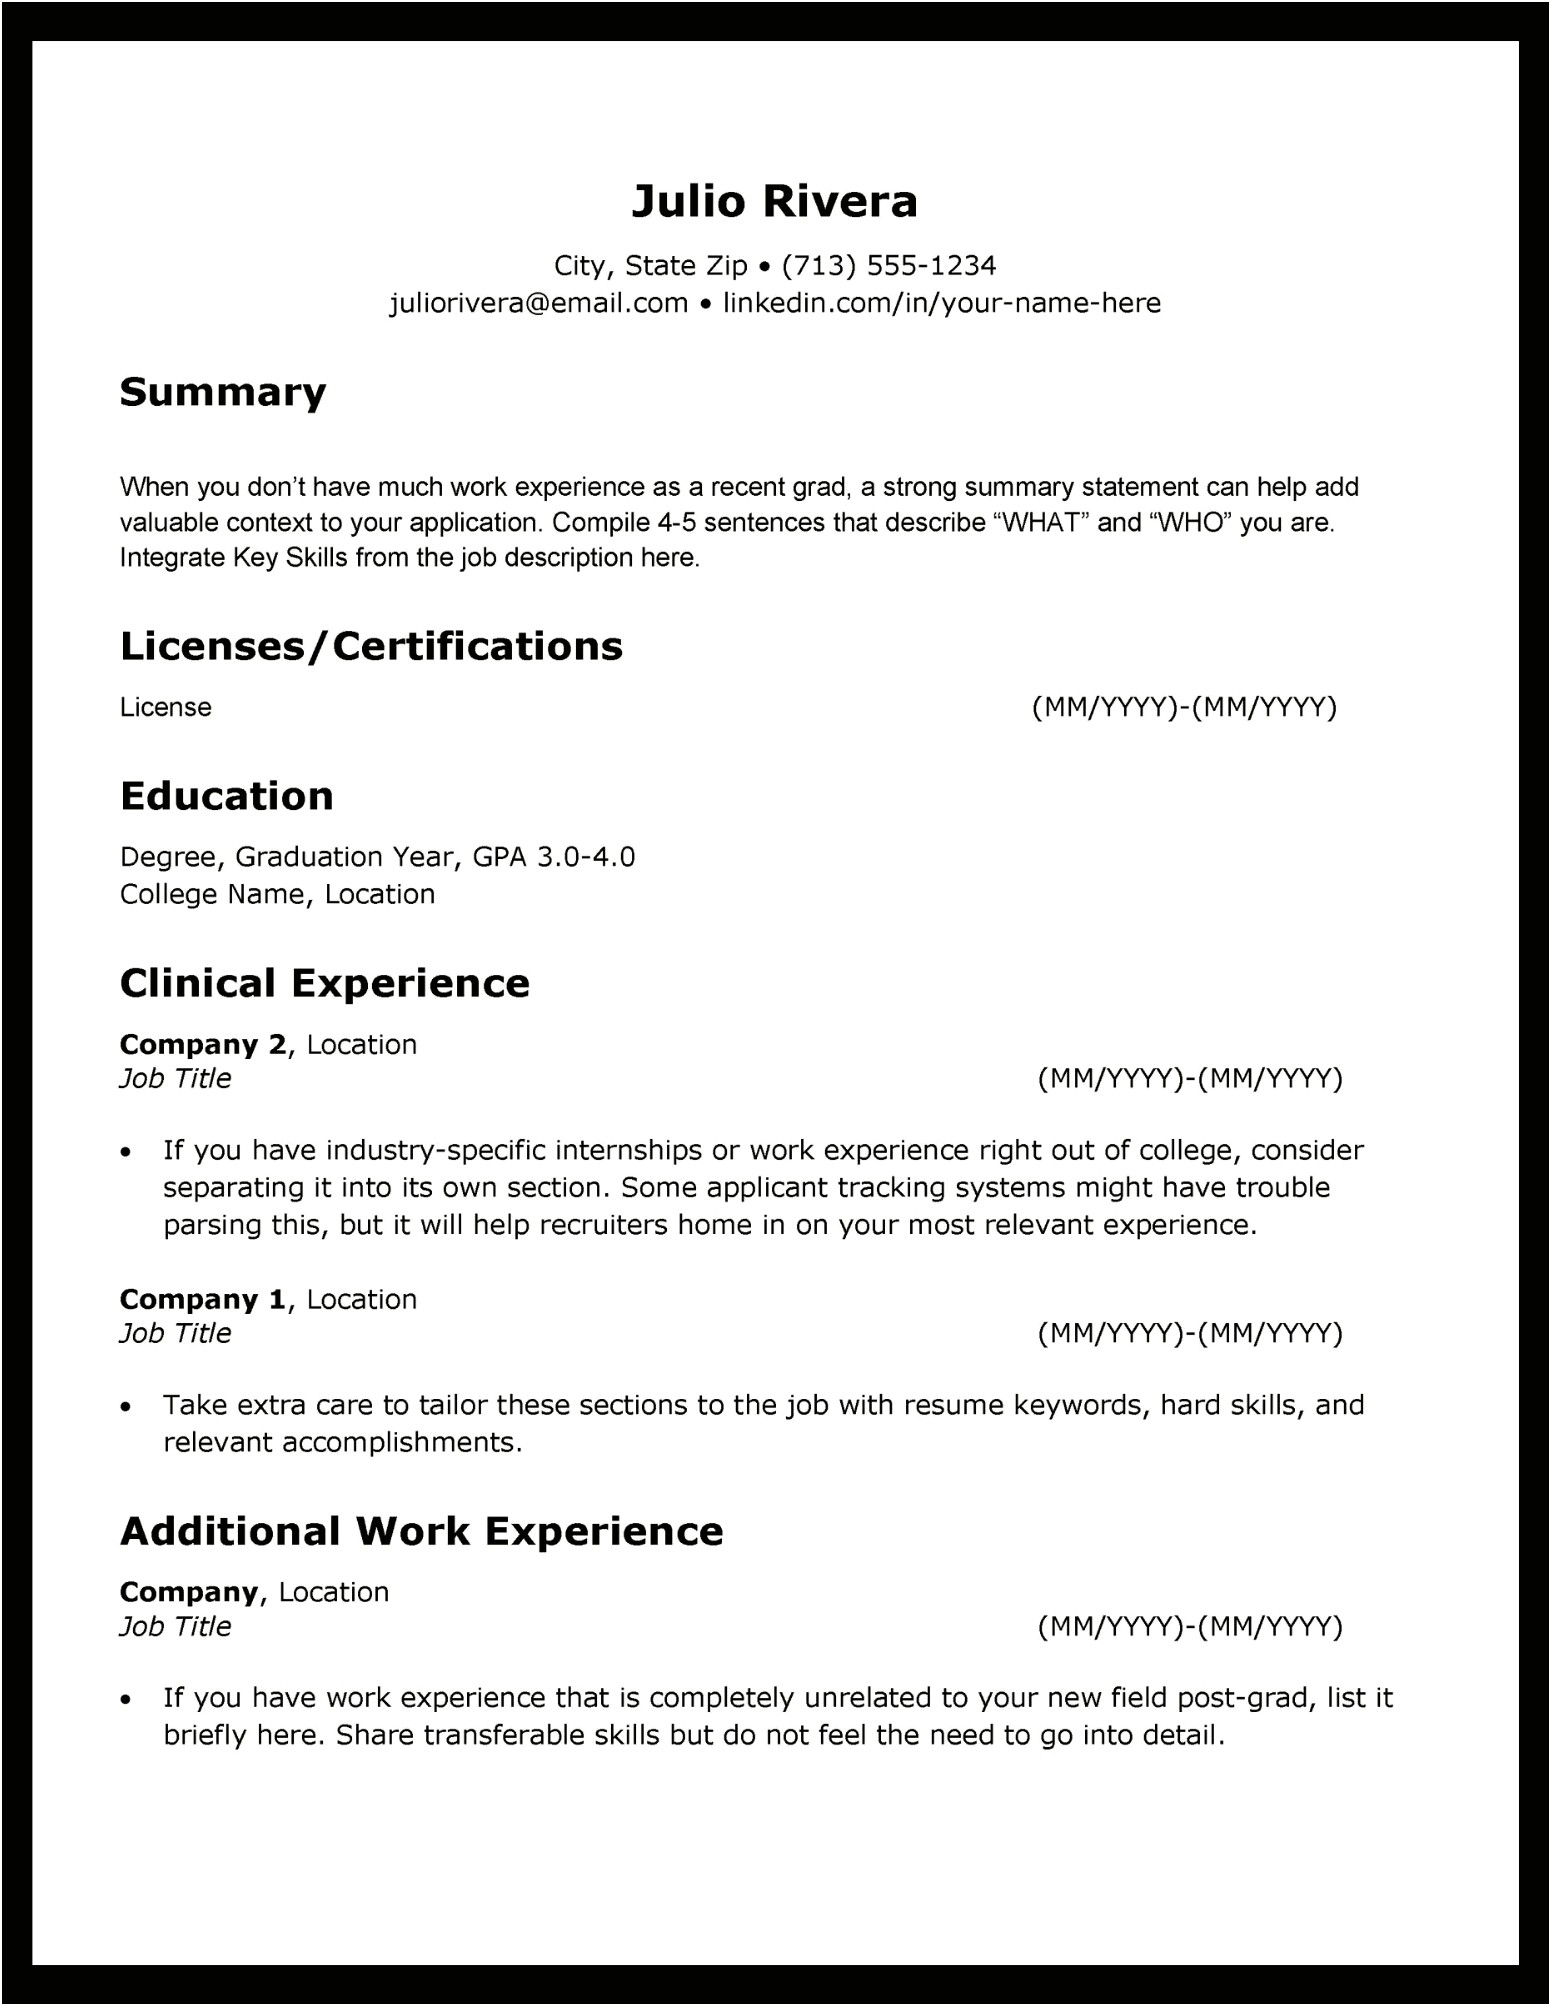 Fresh Out College Resume Without A Job